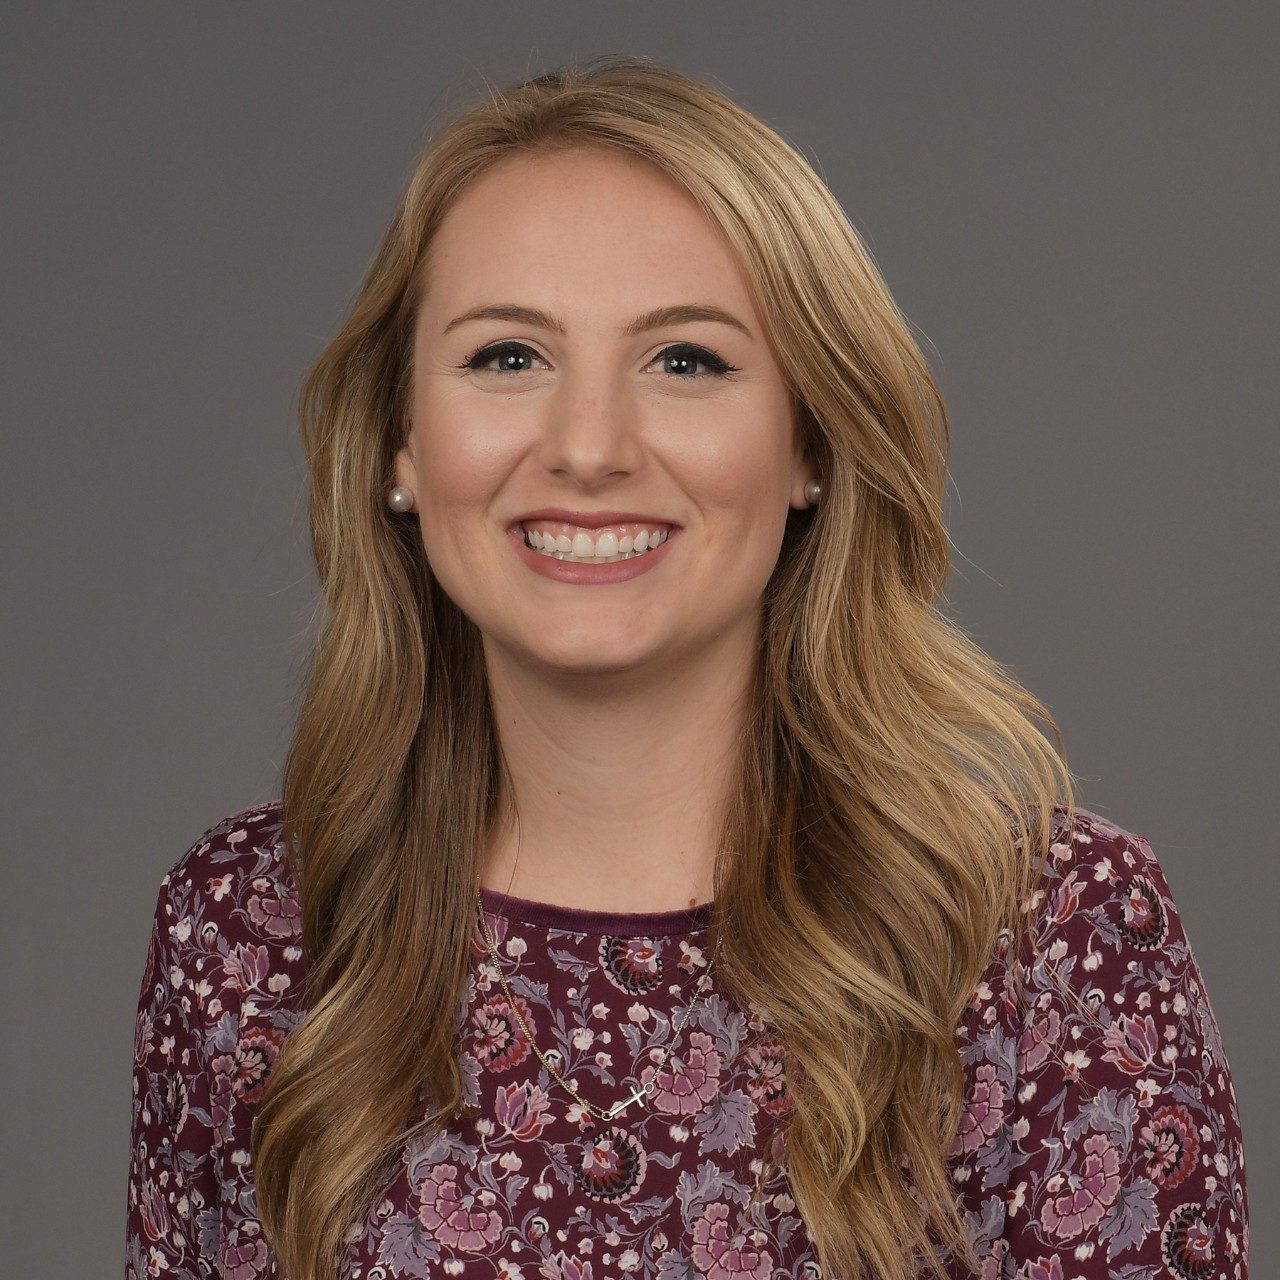 Laura completed several internships while studying public relations. She served as a sports information intern at University of Southern California Athletics and a community relations intern with the San Diego Chargers. Laura is now the partner services coordinator for Virginia Tech IMG Sports Marketing. 